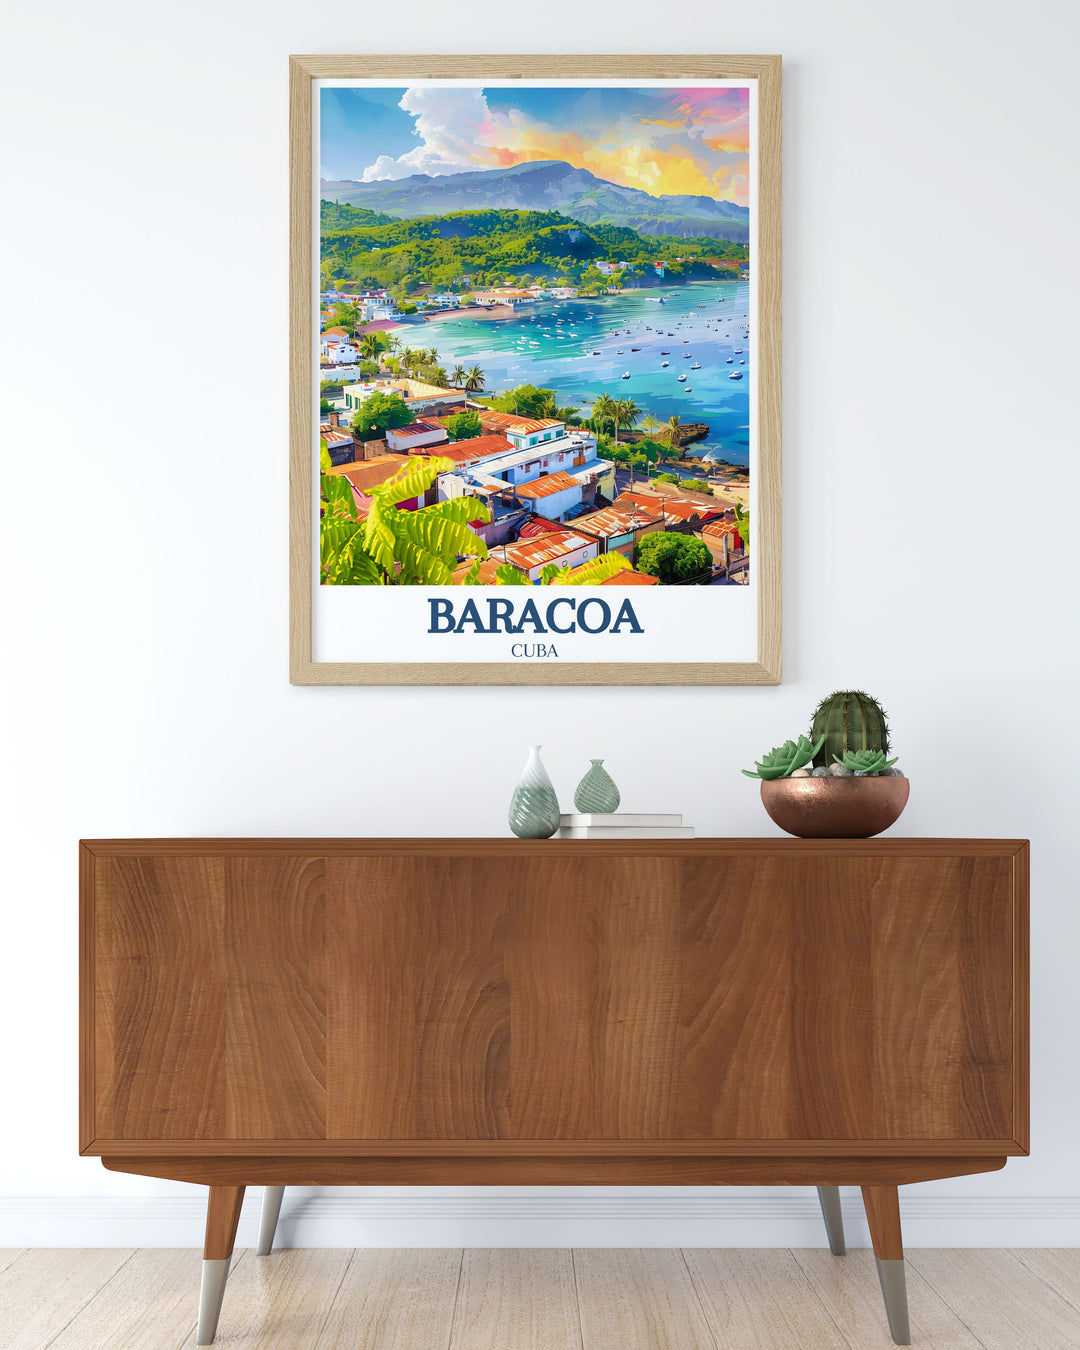 Captivating digital download of Baracoas coastline, featuring the iconic Bay of Honey and the majestic El Yunque Mountain. This print captures the essence of Cubas natural and cultural beauty, perfect for any art collection or as a travel memento.